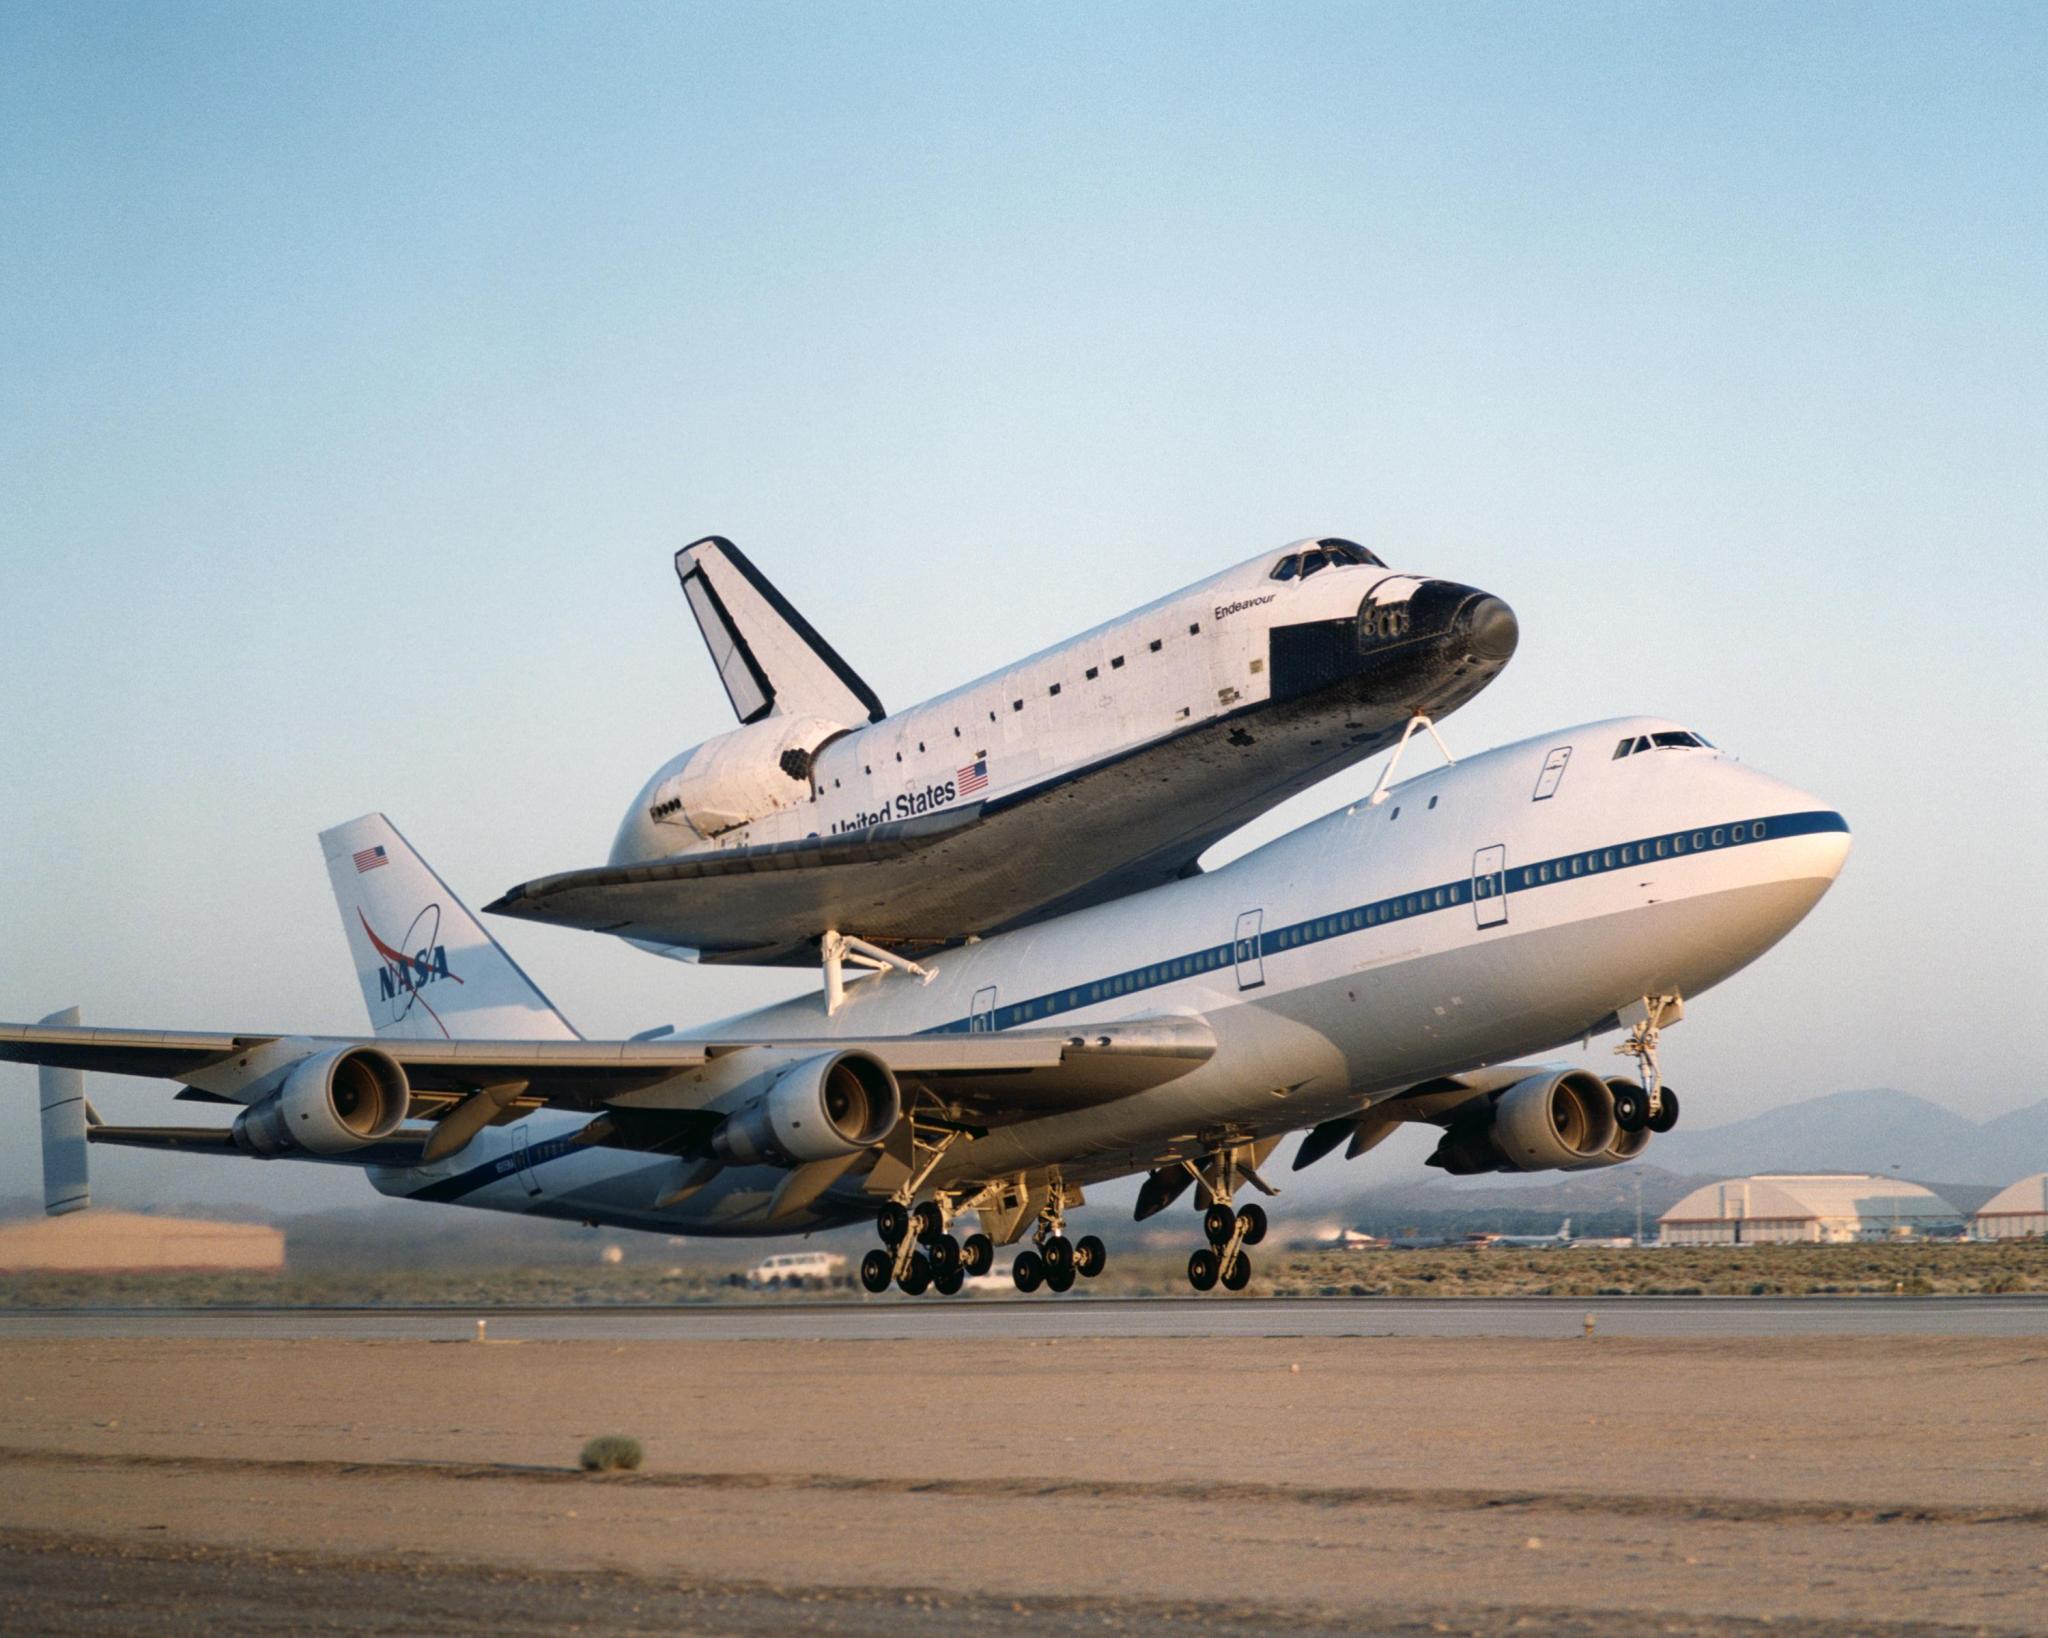 A space shuttle orbiter bolted atop its 747 carrier aircraft takes off from a runway in California.